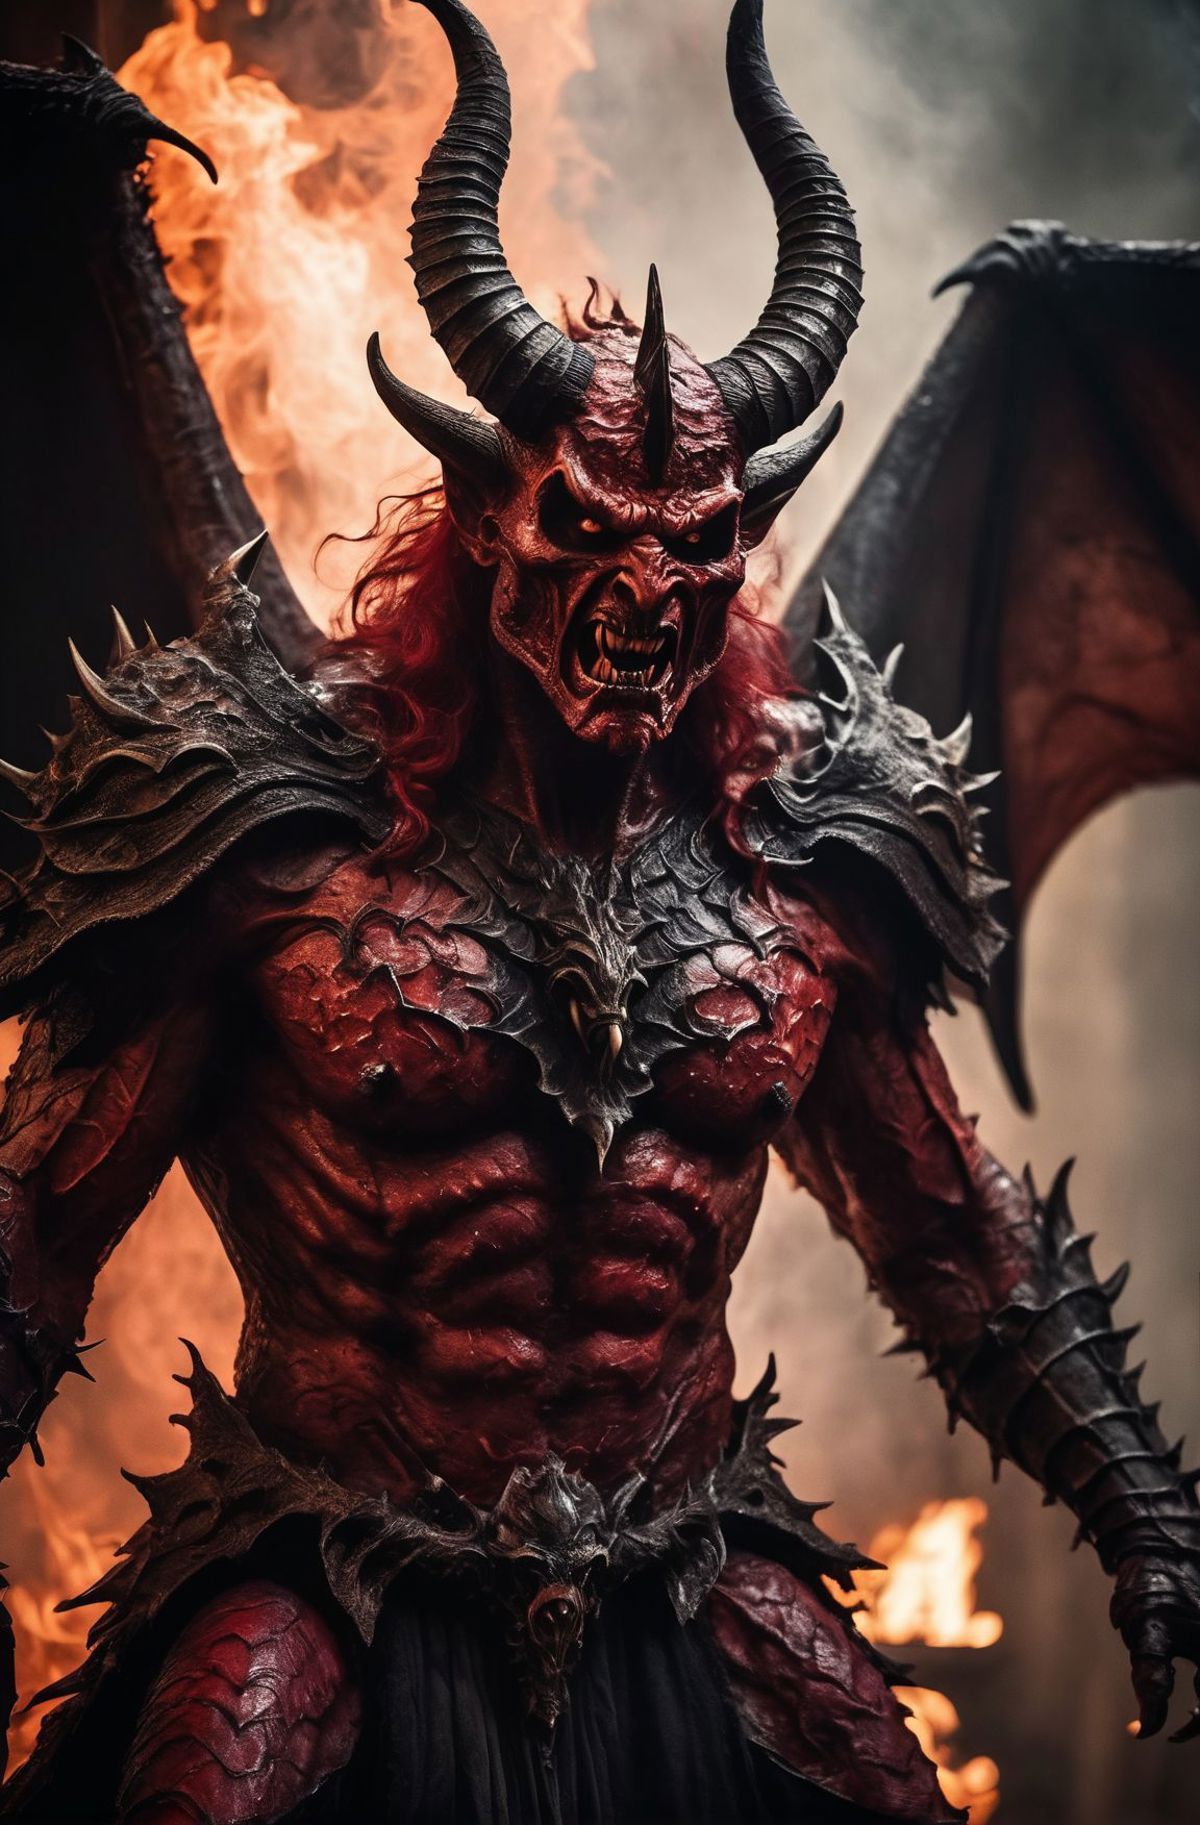 A demonic figure with horns and red hair, possibly a demon or devil, is standing in front of a fire. The figure is wearing a metal armor and has a very menacing appearance.